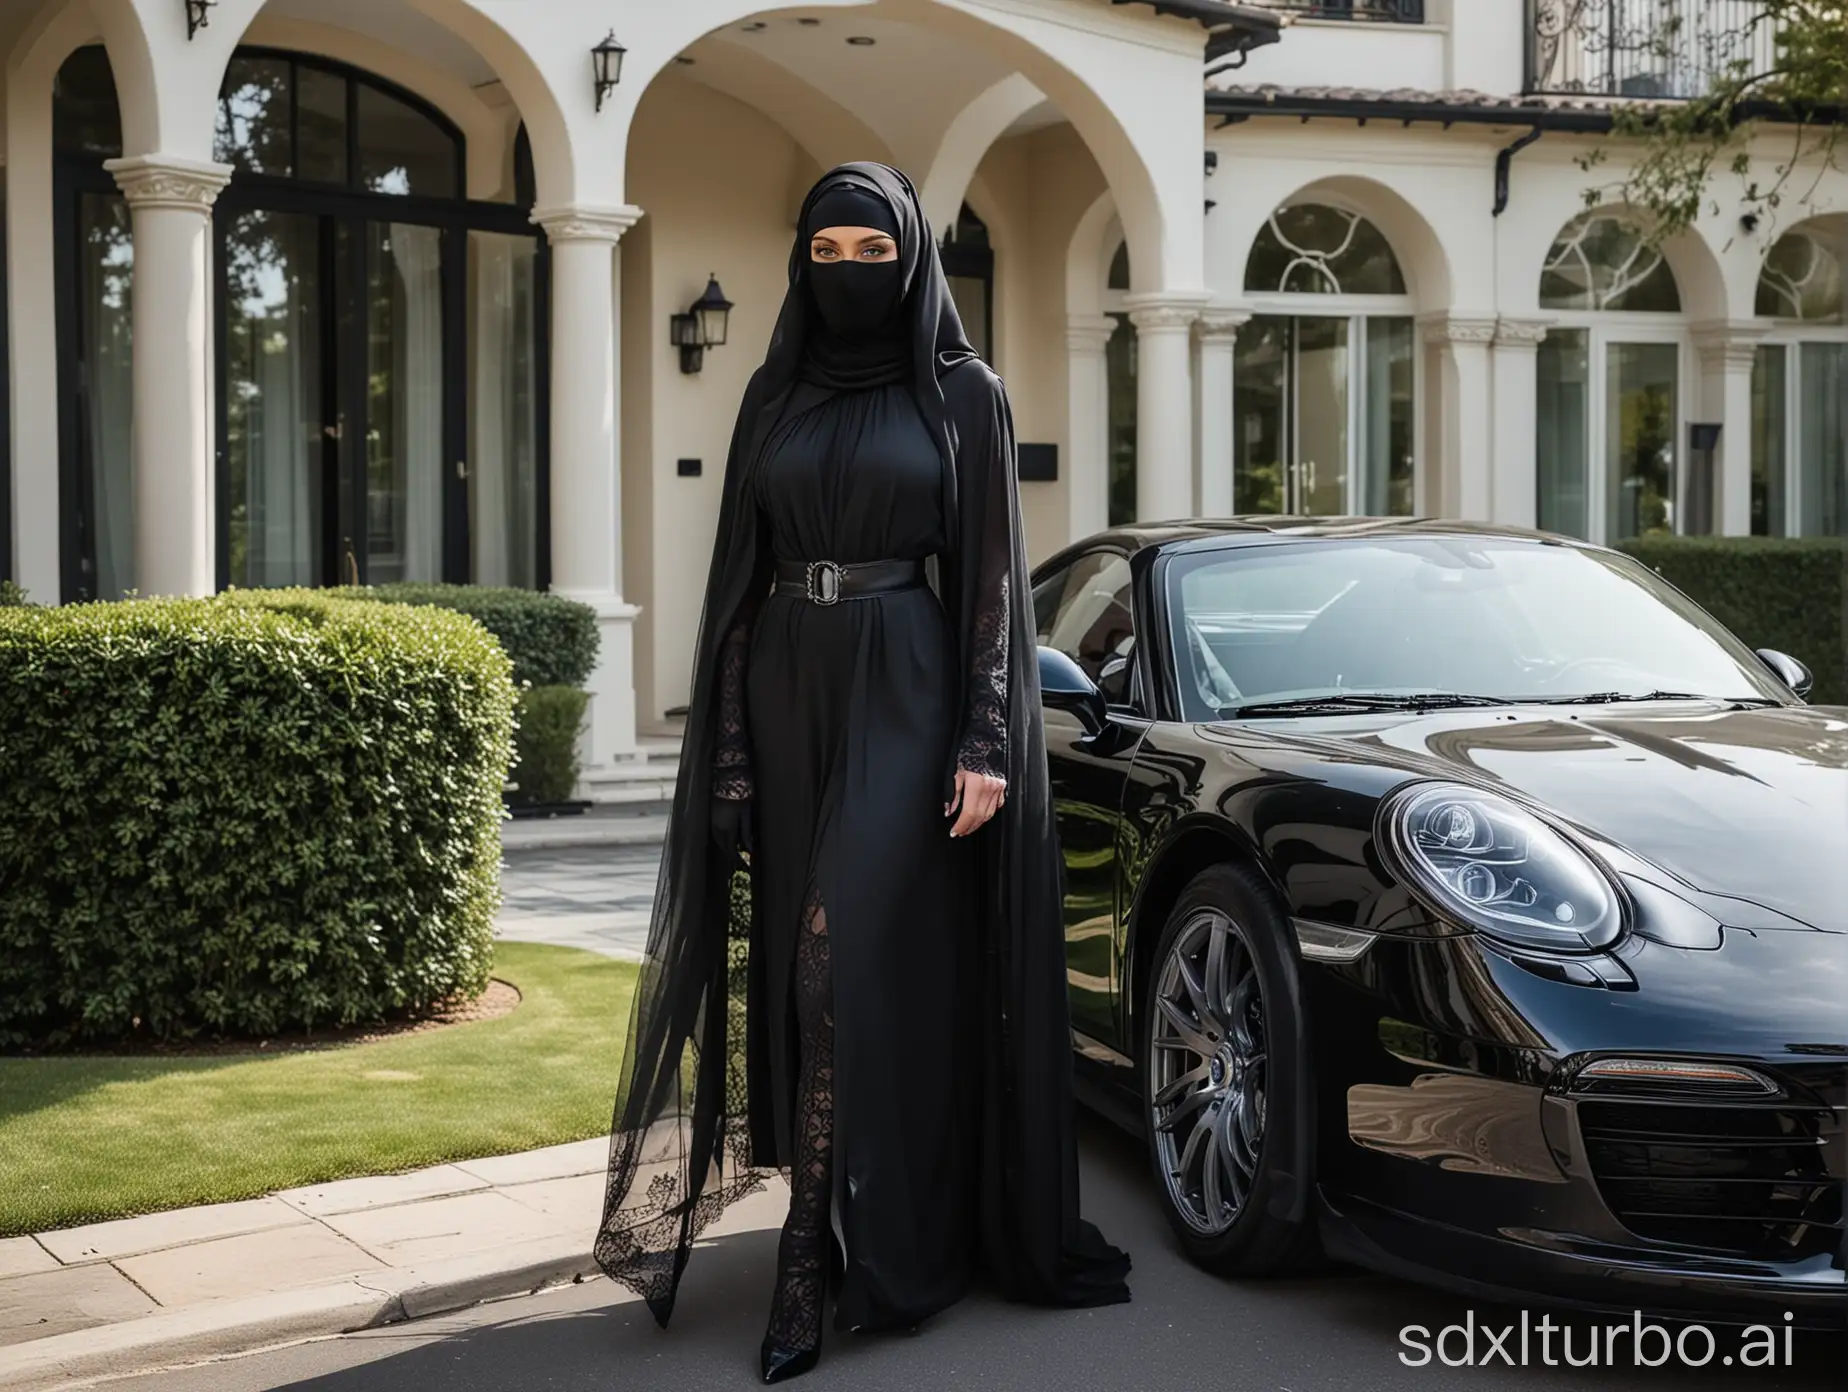 Transgender man BCBG, blue eyes, standing, fully black abaya, fully black niqab on head, transparent lace veil on head, mask on mouth, black stockings, long black skirt, high-heeled Mary Jane shoes.
Transparent black gloves.
In front of luxury house, next to black Porsche 911.